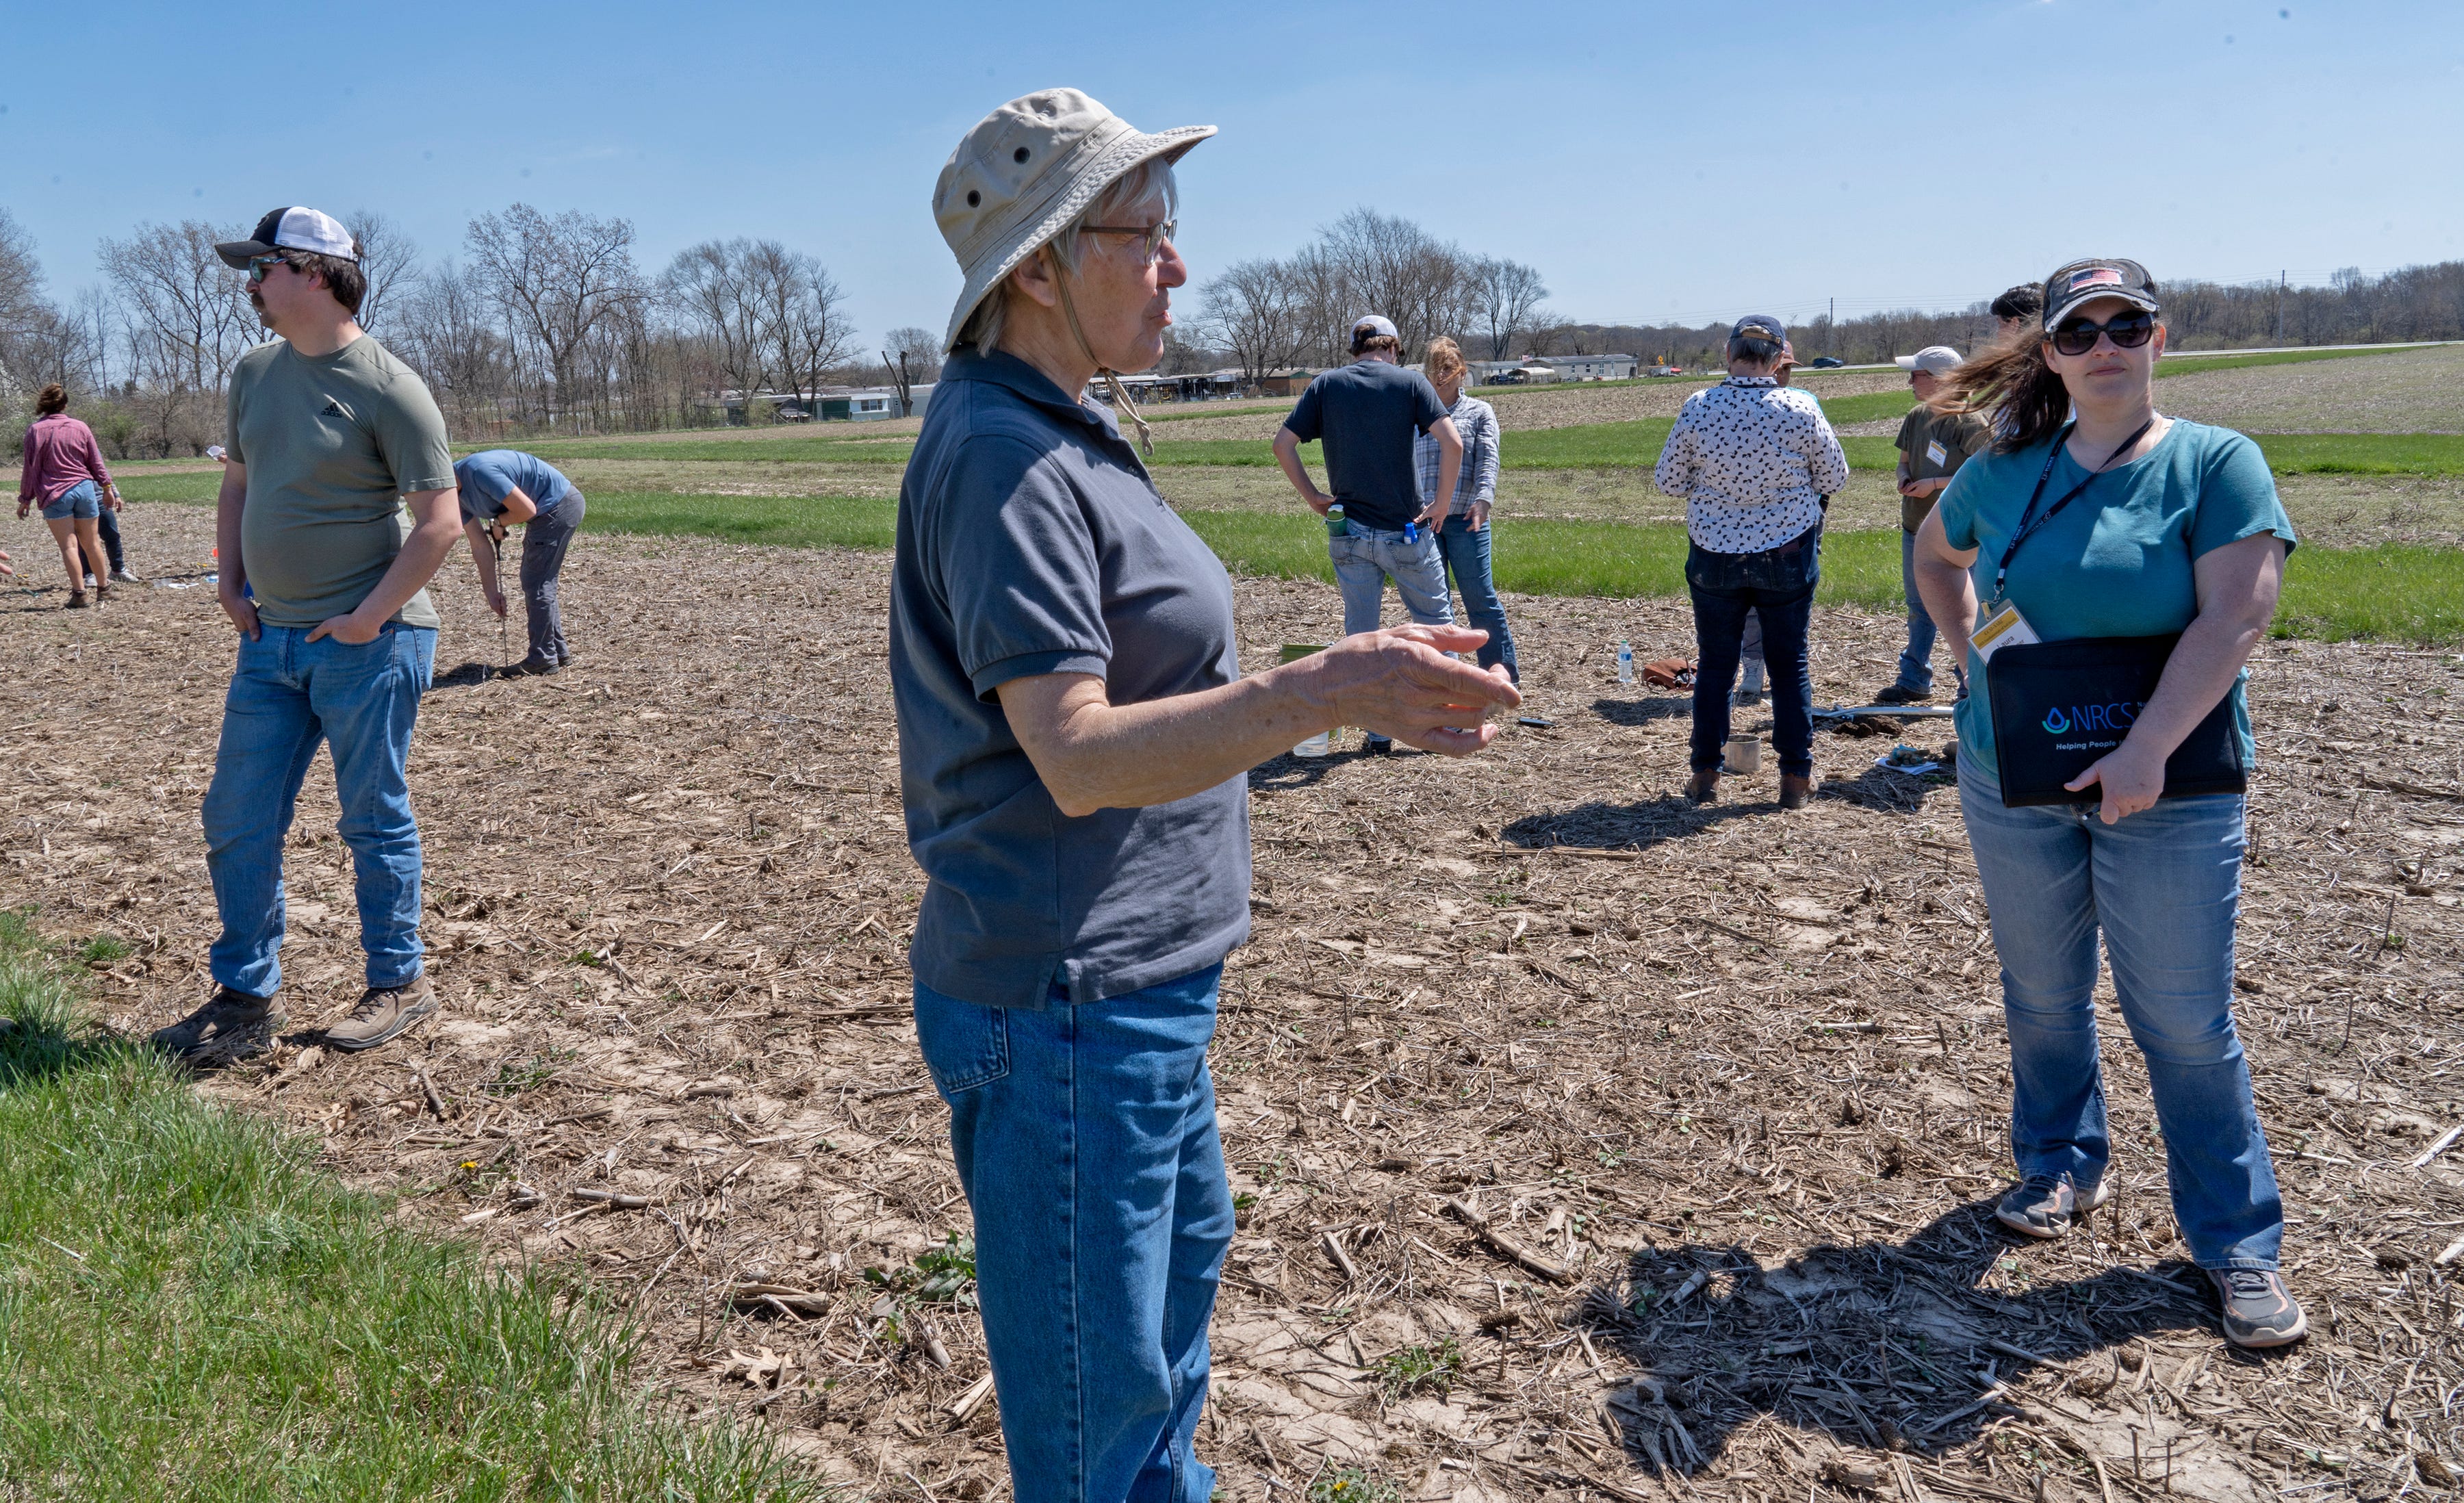 Eileen Kladivko, a Purdue University professor of agronomy, teaches newer professionals in conservation agencies and departments around the state about cover crops and soil health.